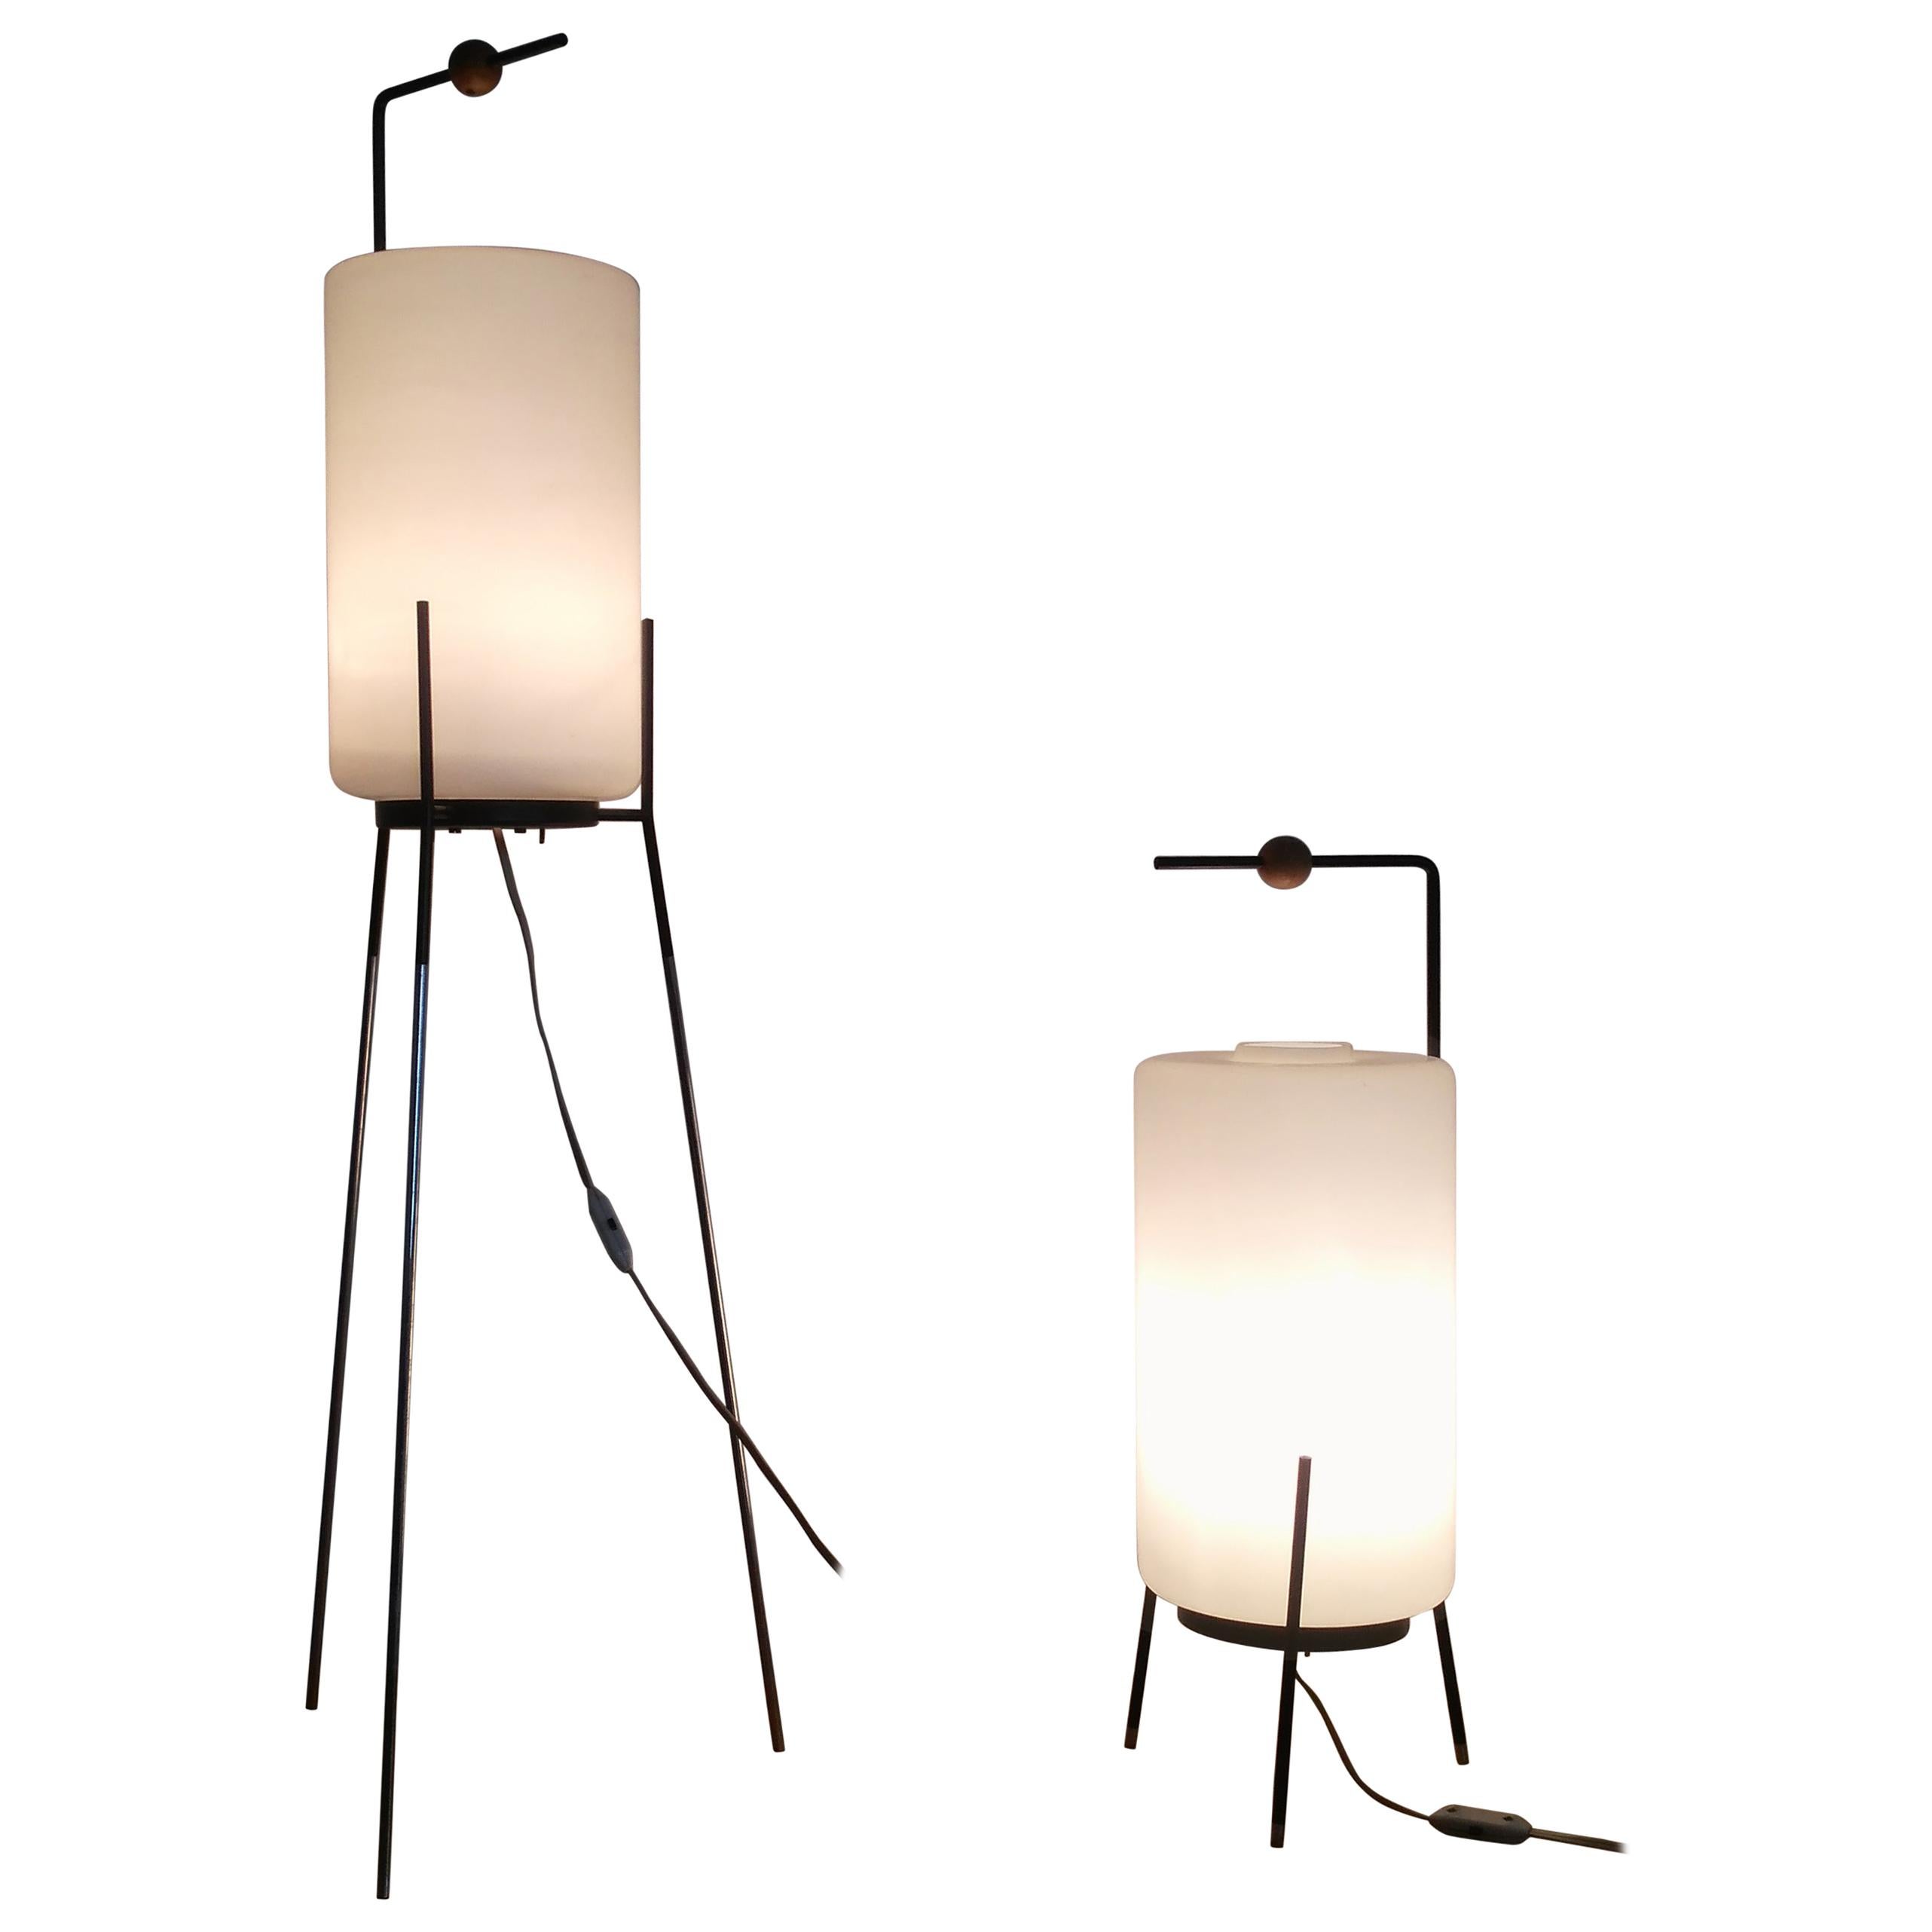 Set of Very Rare Floor Lamps by Josef Hůrka, 1960 For Sale